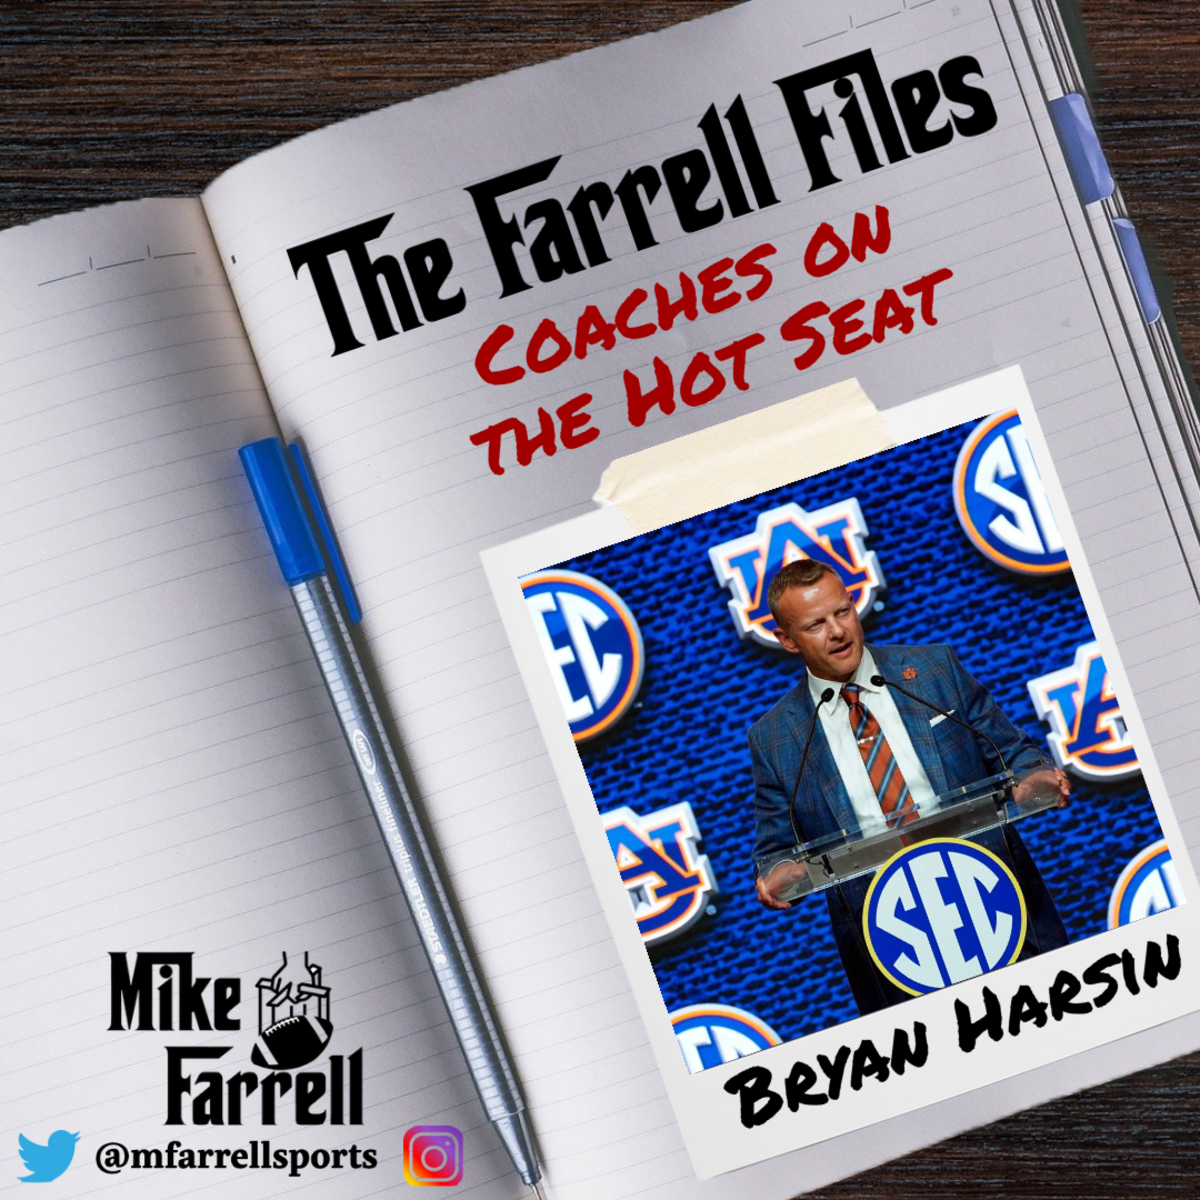 Farrell Files - Coaches on the Hot Seat